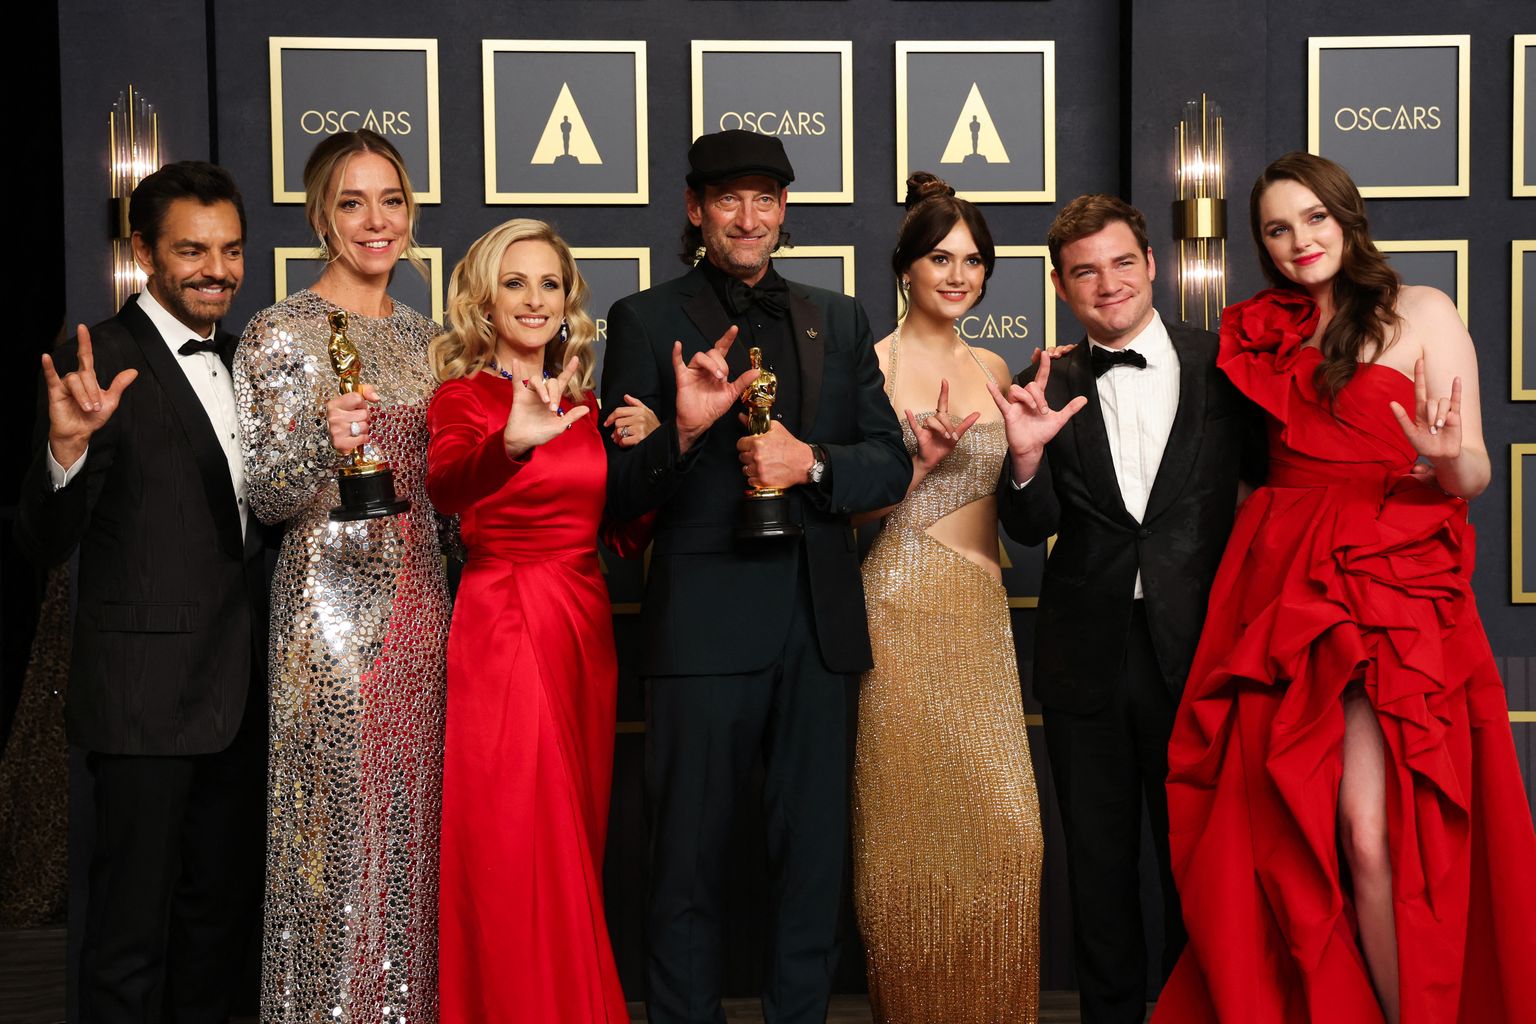 The cast and crew as well as presenter Amy Forsyth pose with their Oscars for Best Picture for "CODA" in the photo room during the 94th Academy Awards in Hollywood, Los Angeles, California, U.S., March 27, 2022.  REUTERS/Mario Anzuoni